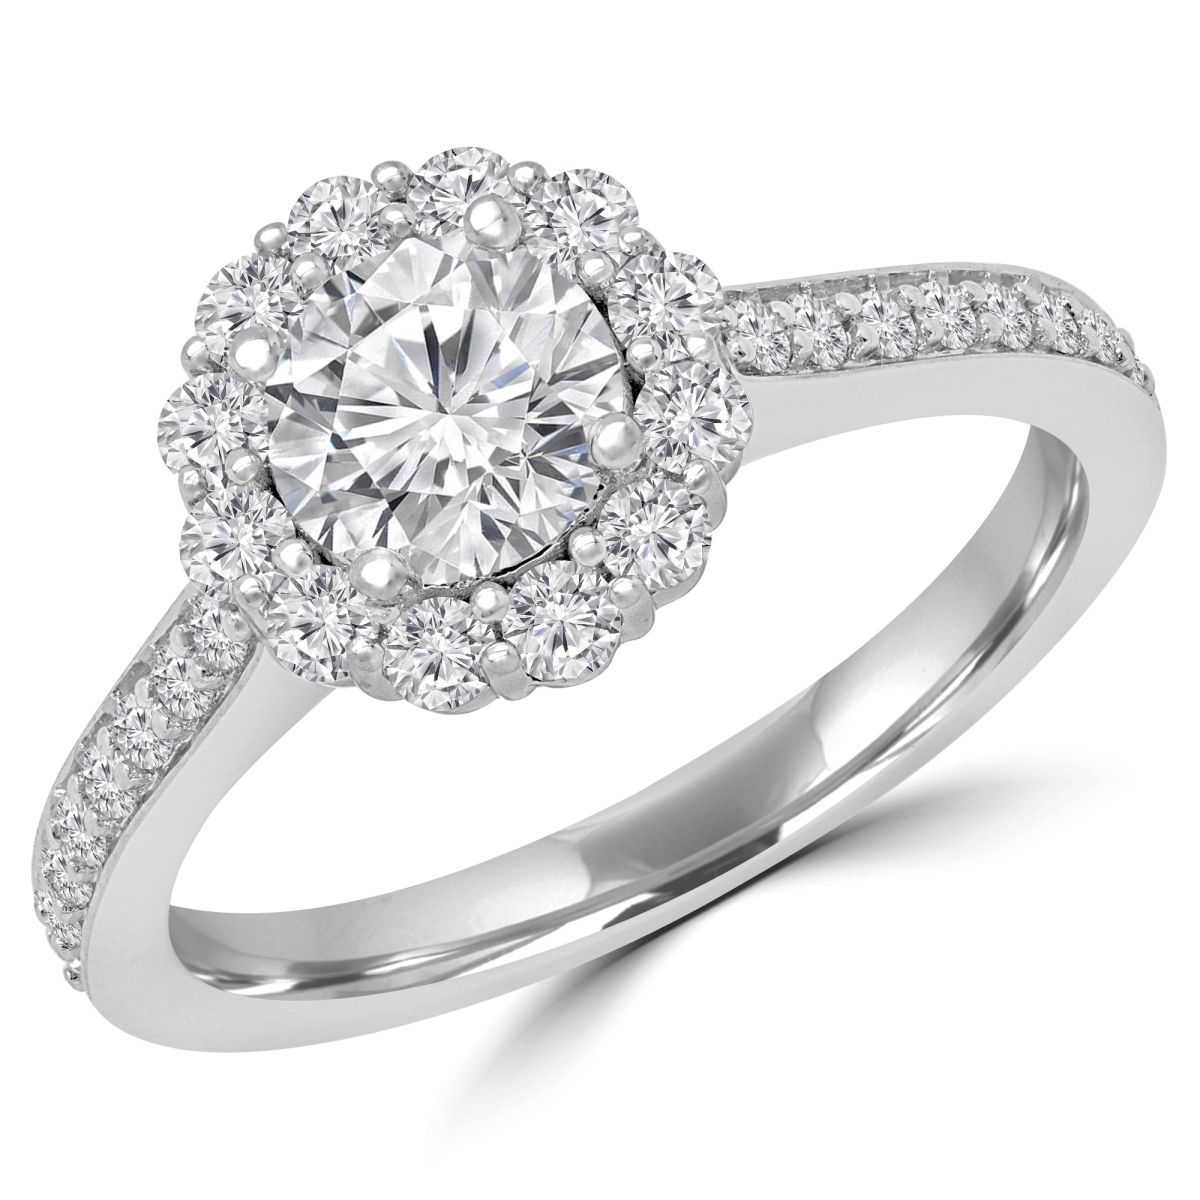 Picture of Majesty Diamonds MD190120-P 0.9 CTW Round Diamond Halo Engagement Ring in 14K White Gold